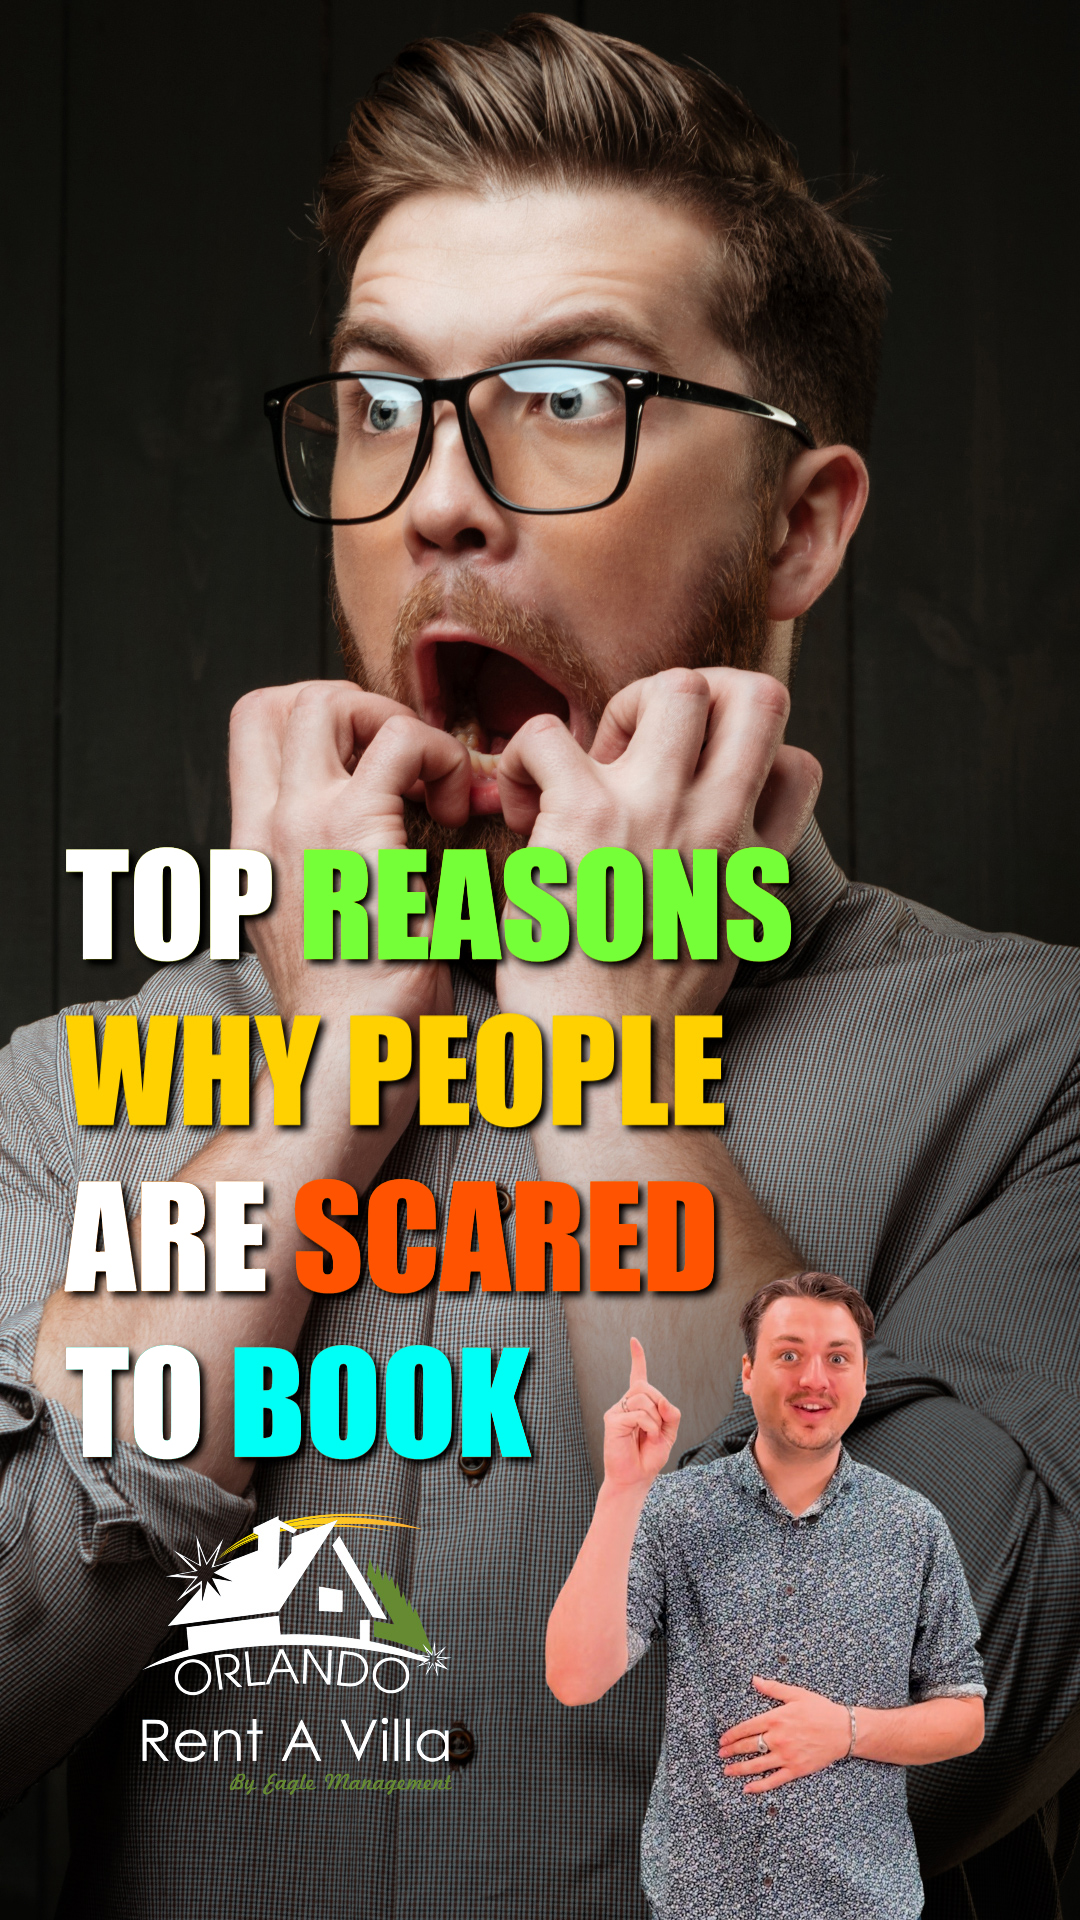 Top 6 reasons why people may be scared to book